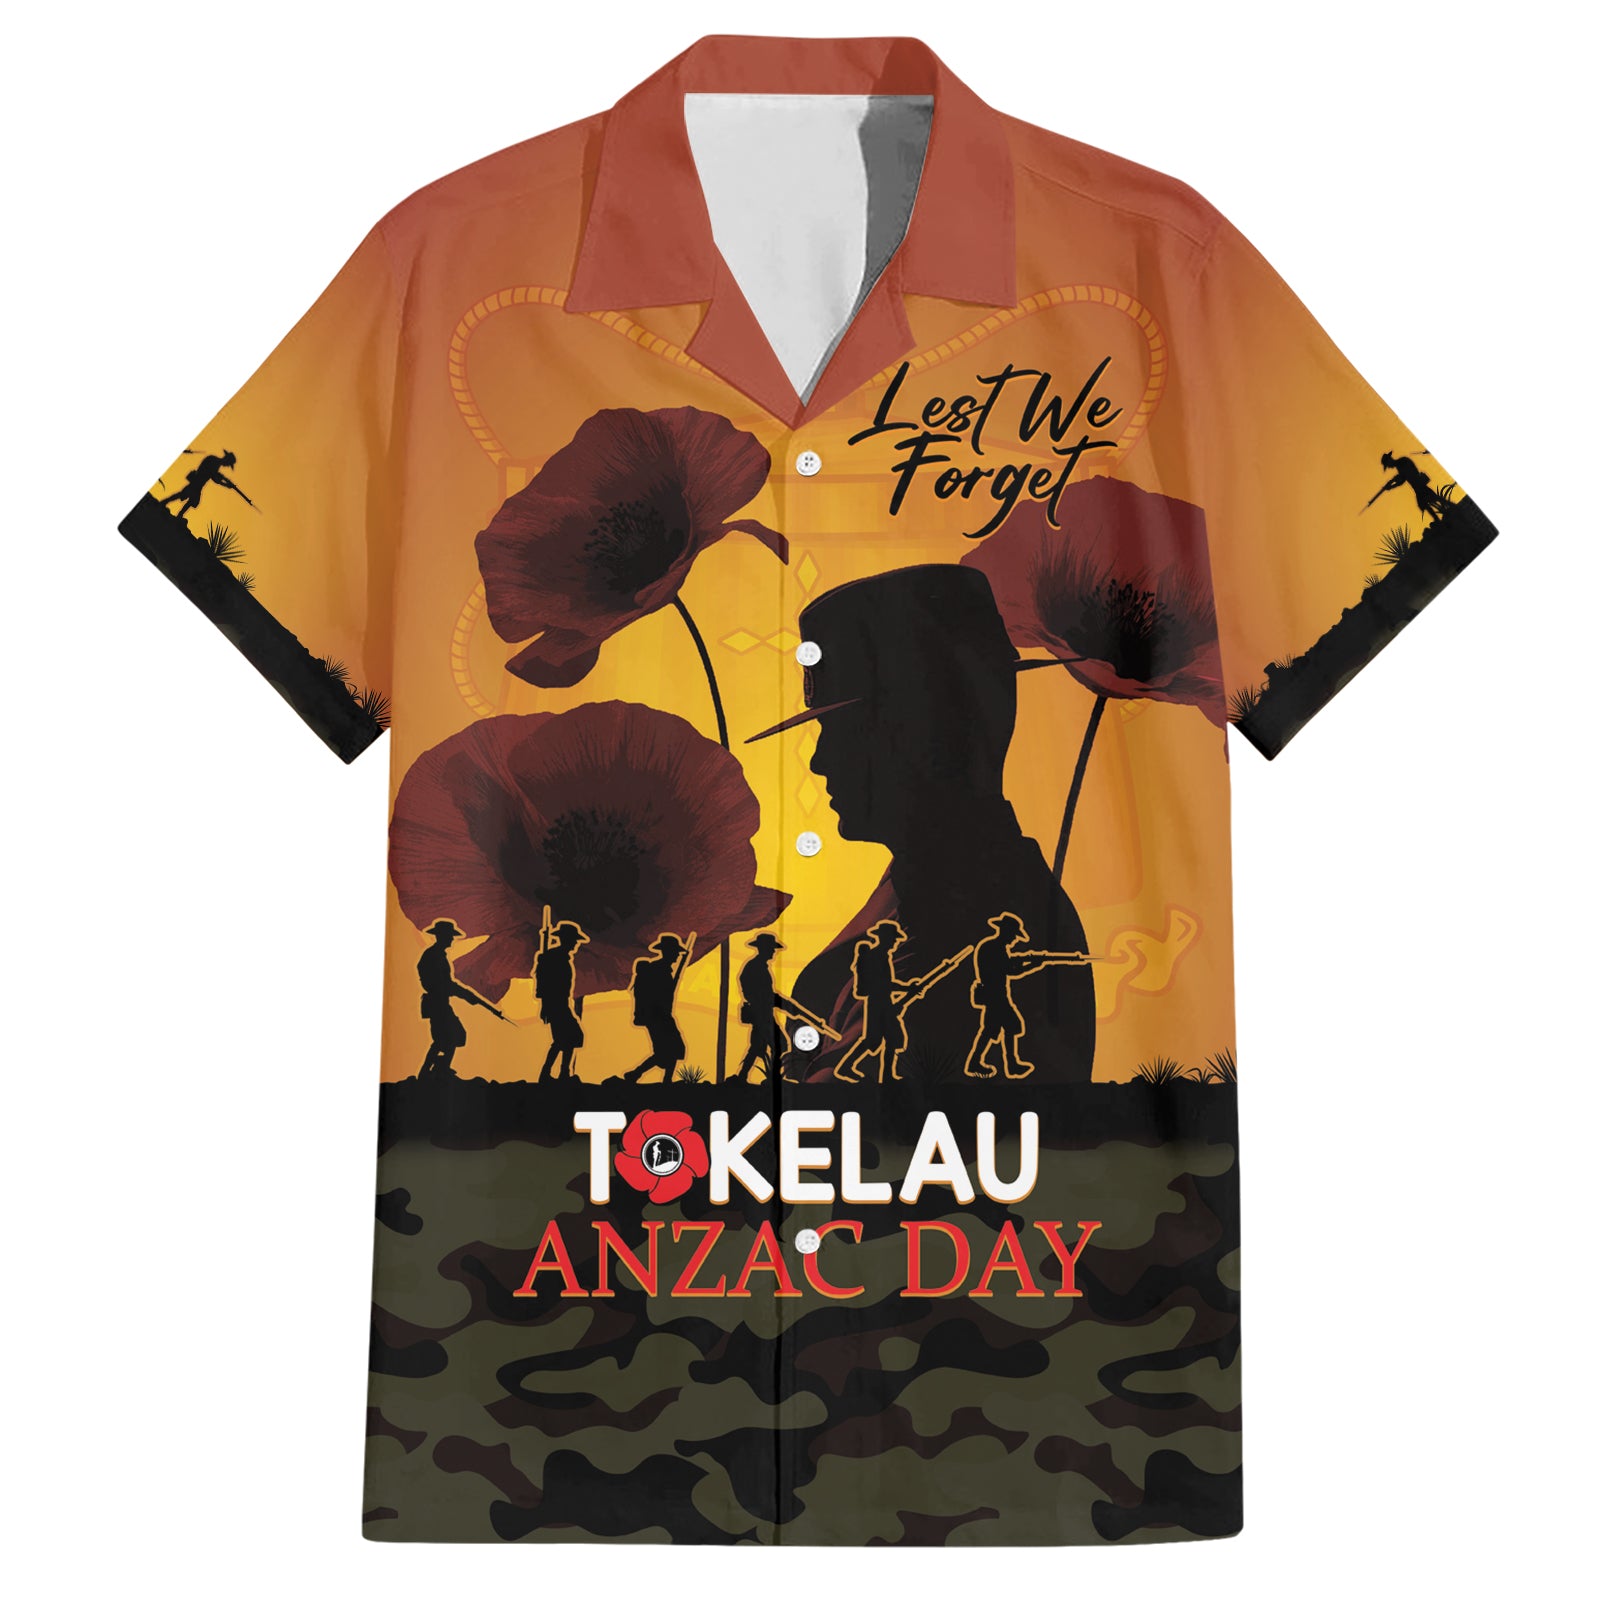 Tokelau ANZAC Day Hawaiian Shirt Camouflage With Poppies Lest We Forget LT14 Yellow - Polynesian Pride